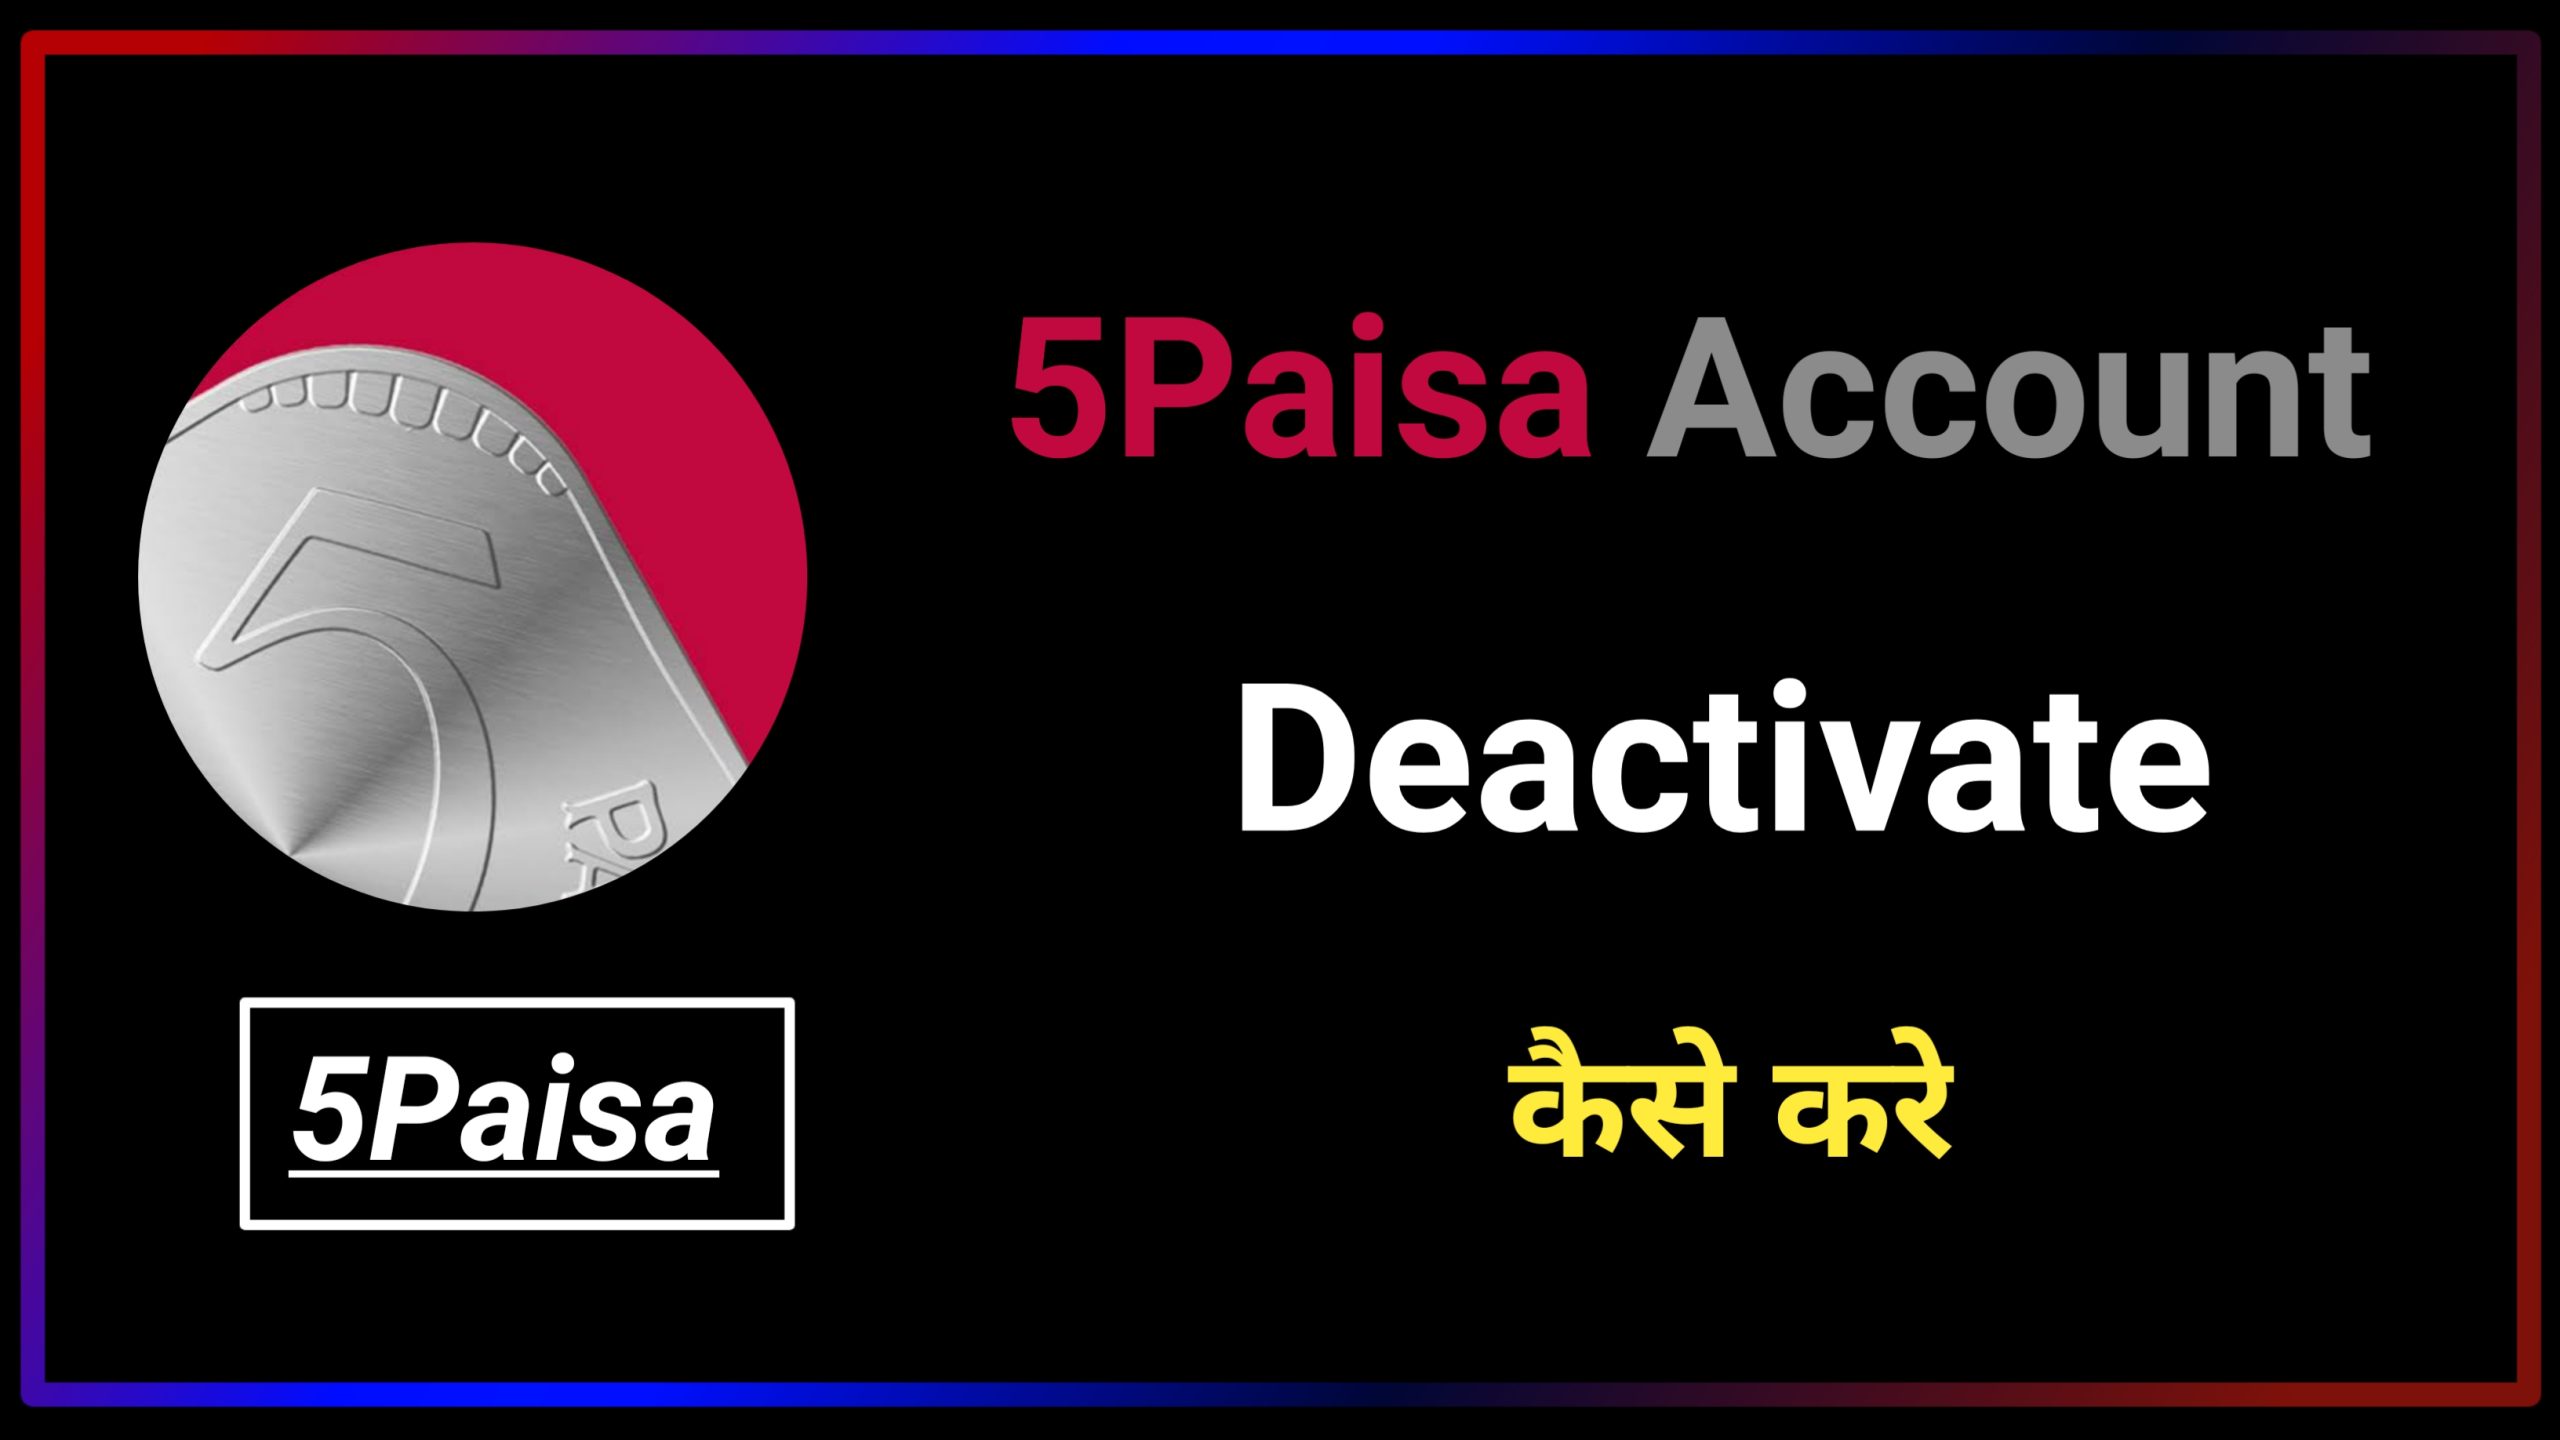 How to Deactivate 5paisa Account | 5paisa Account Deactivate Kaise Kare 